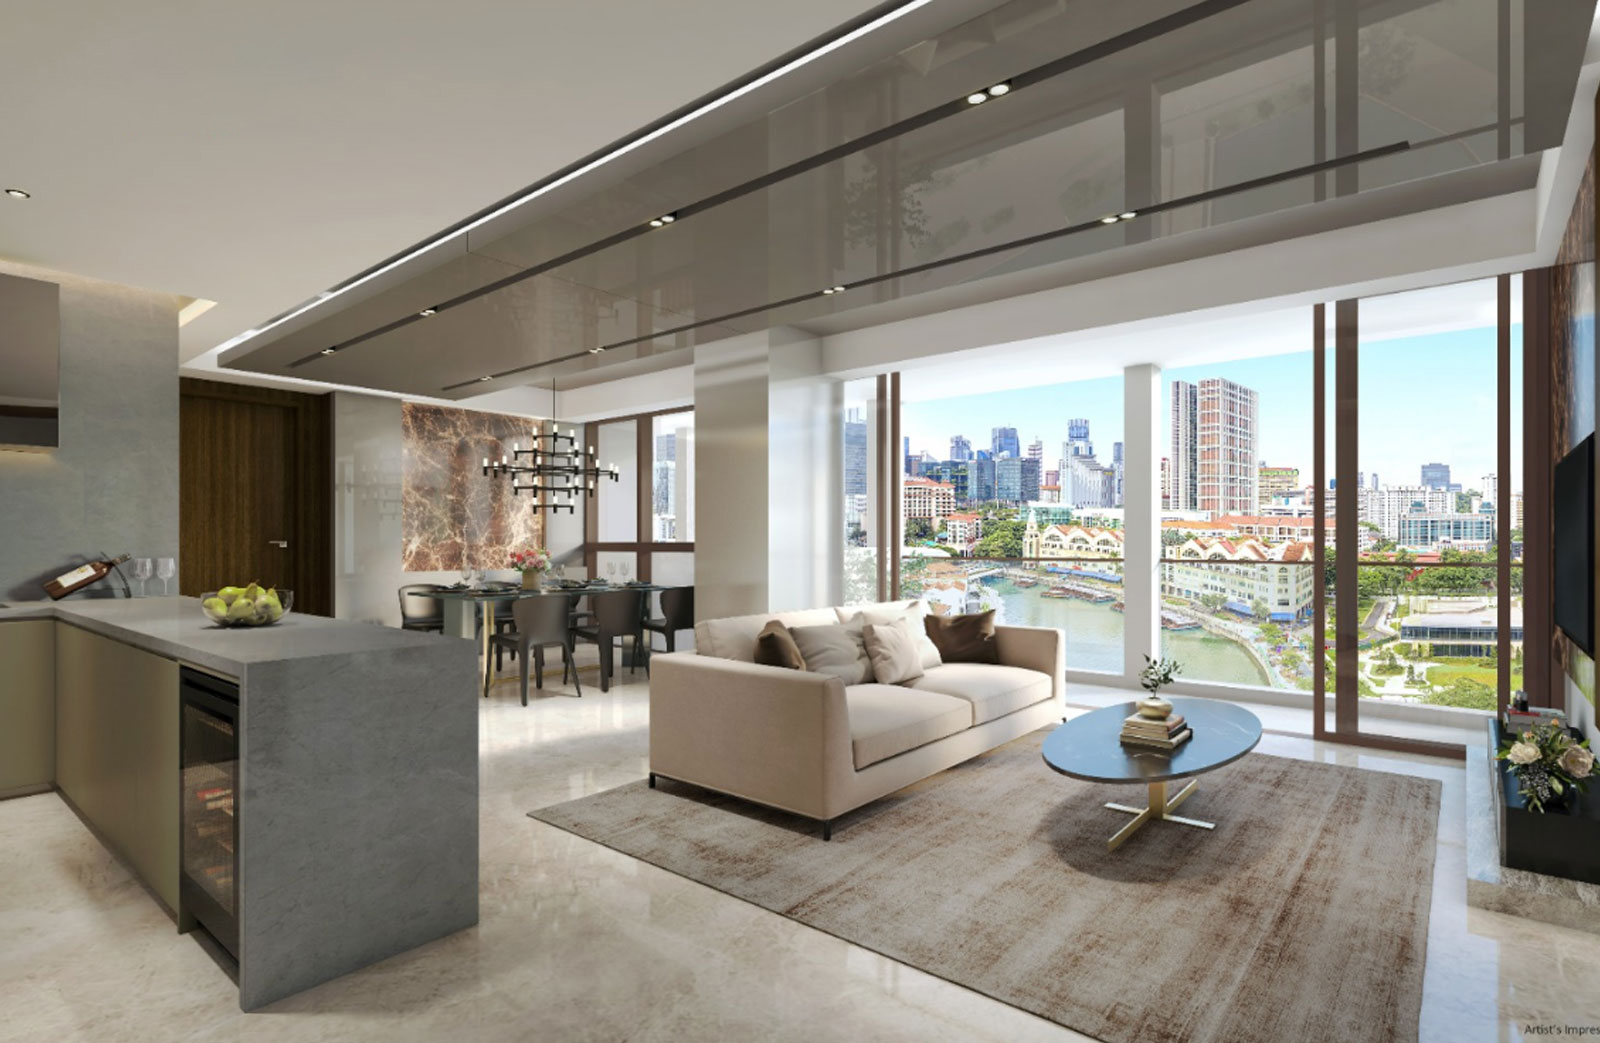 CanningHill Pieres - Singapore new launches start from $1.16 million for a 1-bedroom apartment